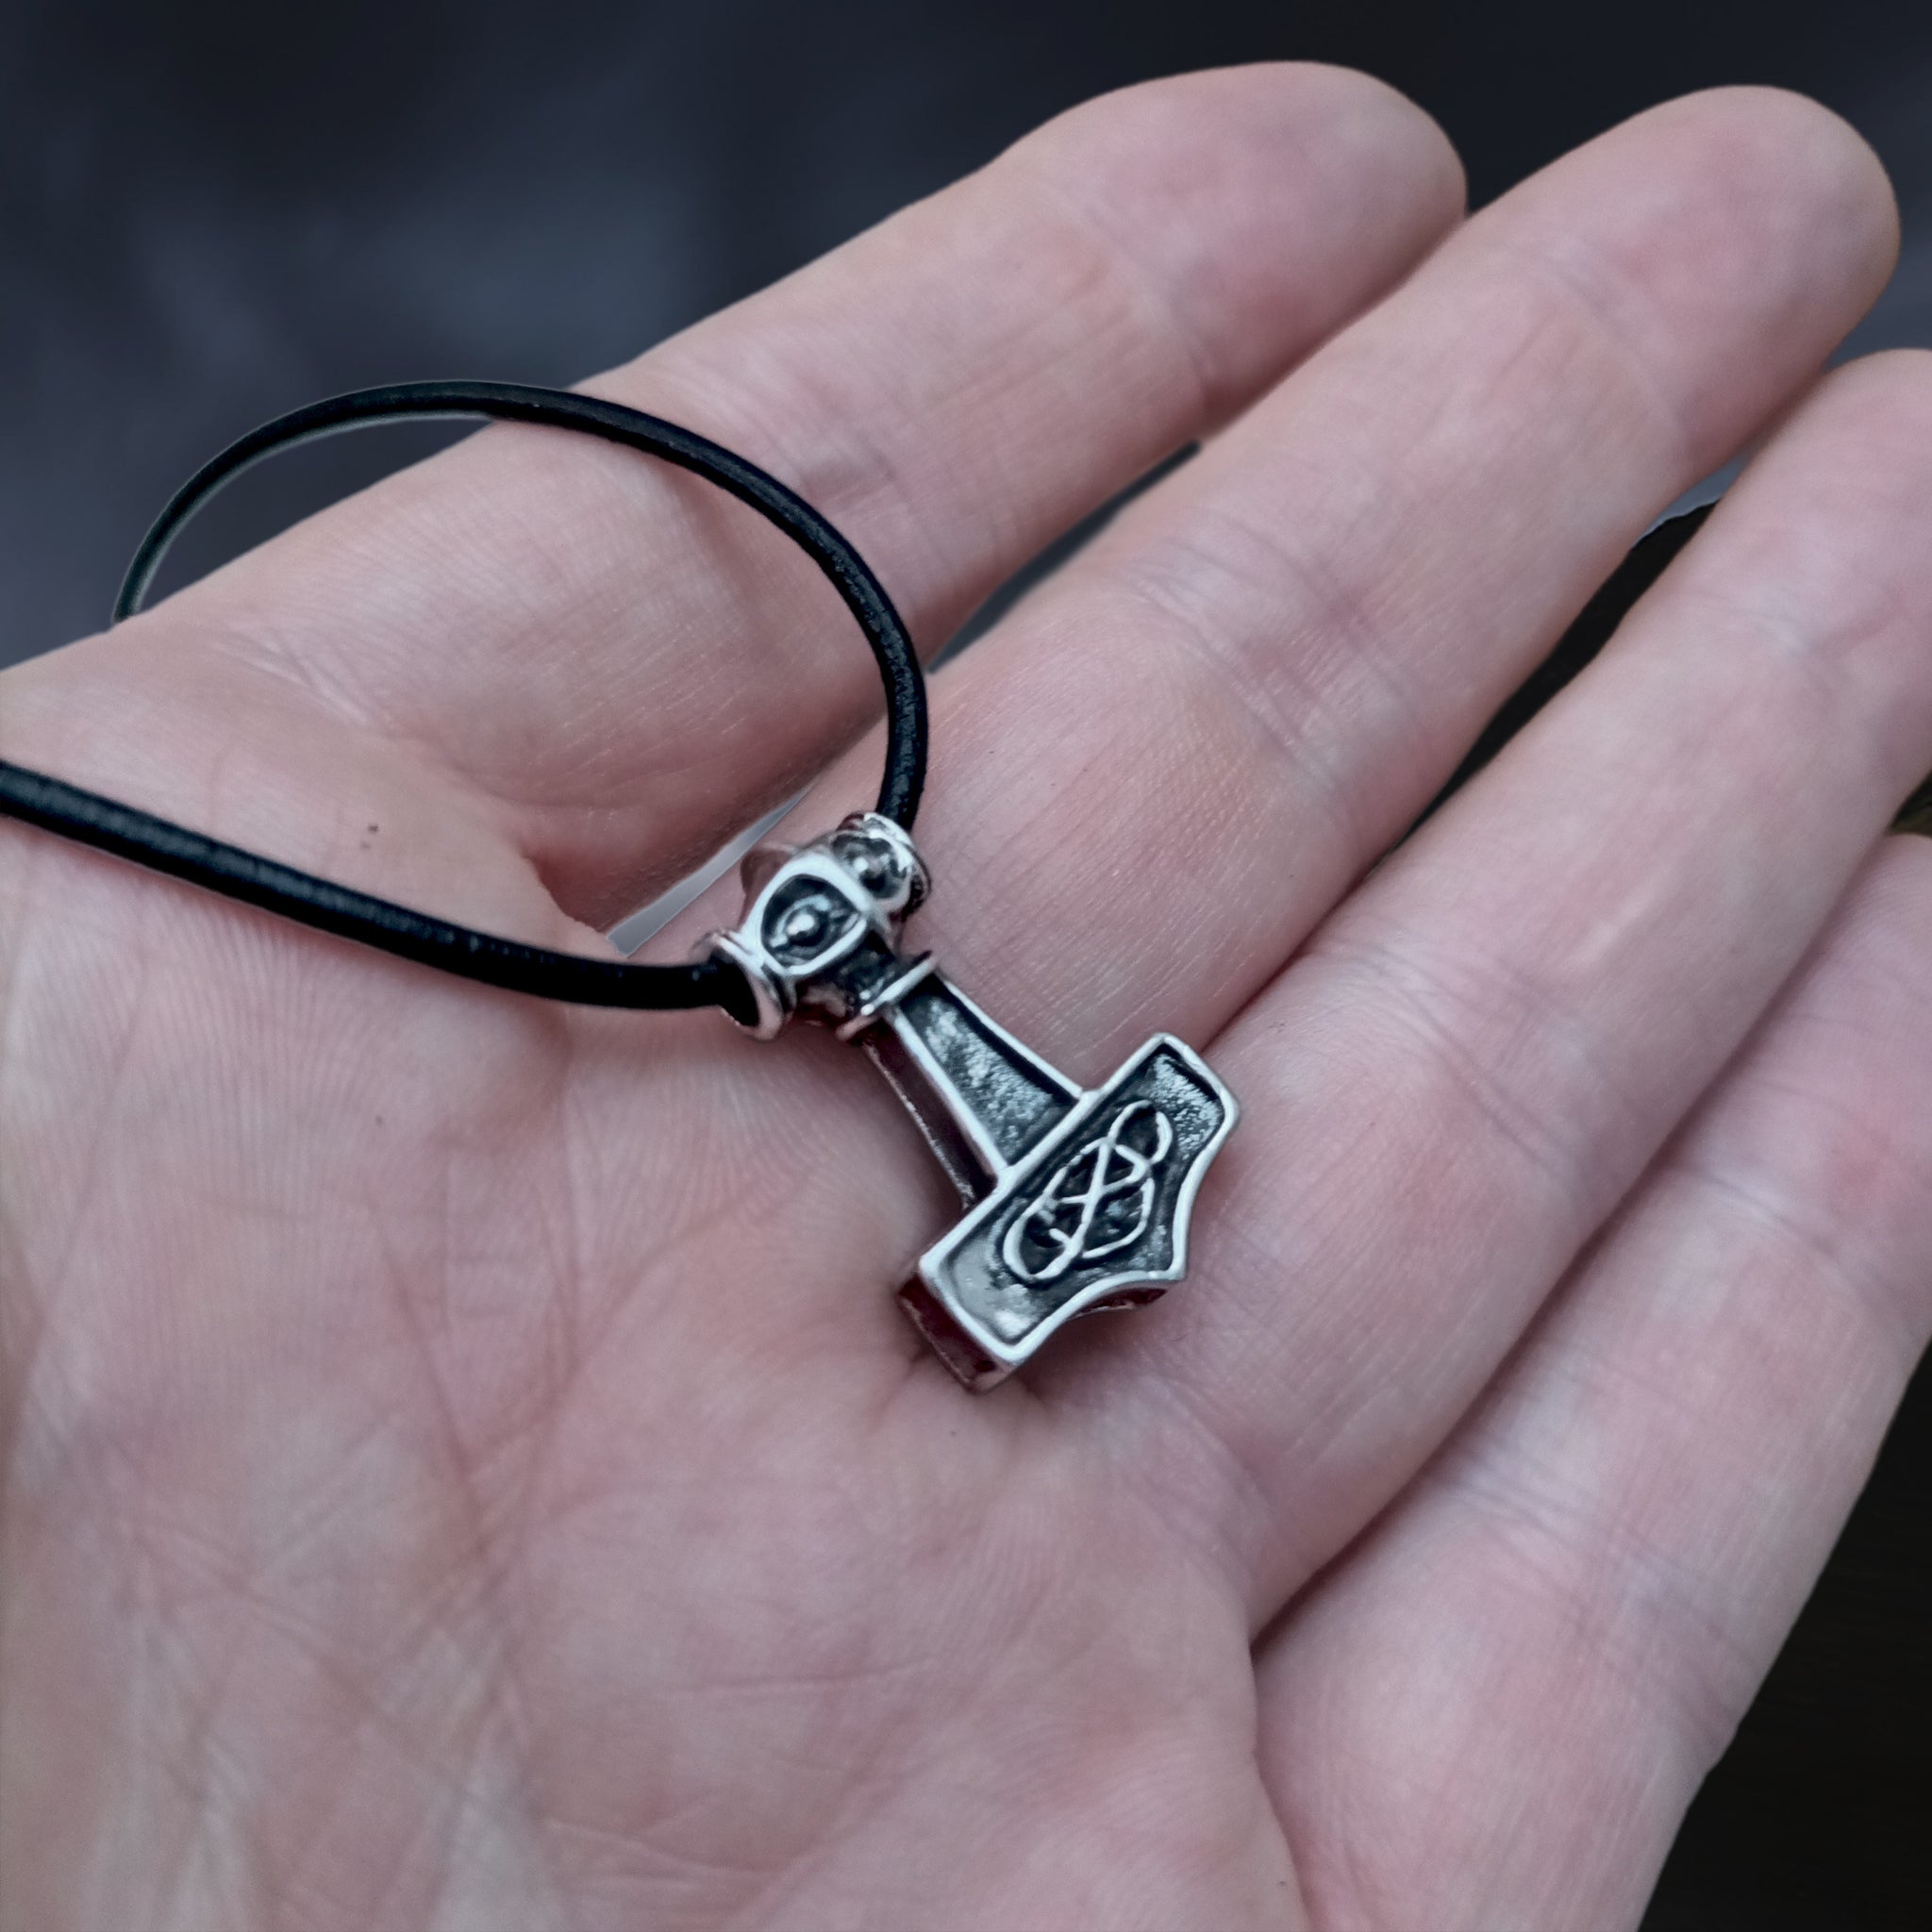 Small Silver Thunder Thors Hammer Viking Pendant on Leather Thong on Hand - Angle View